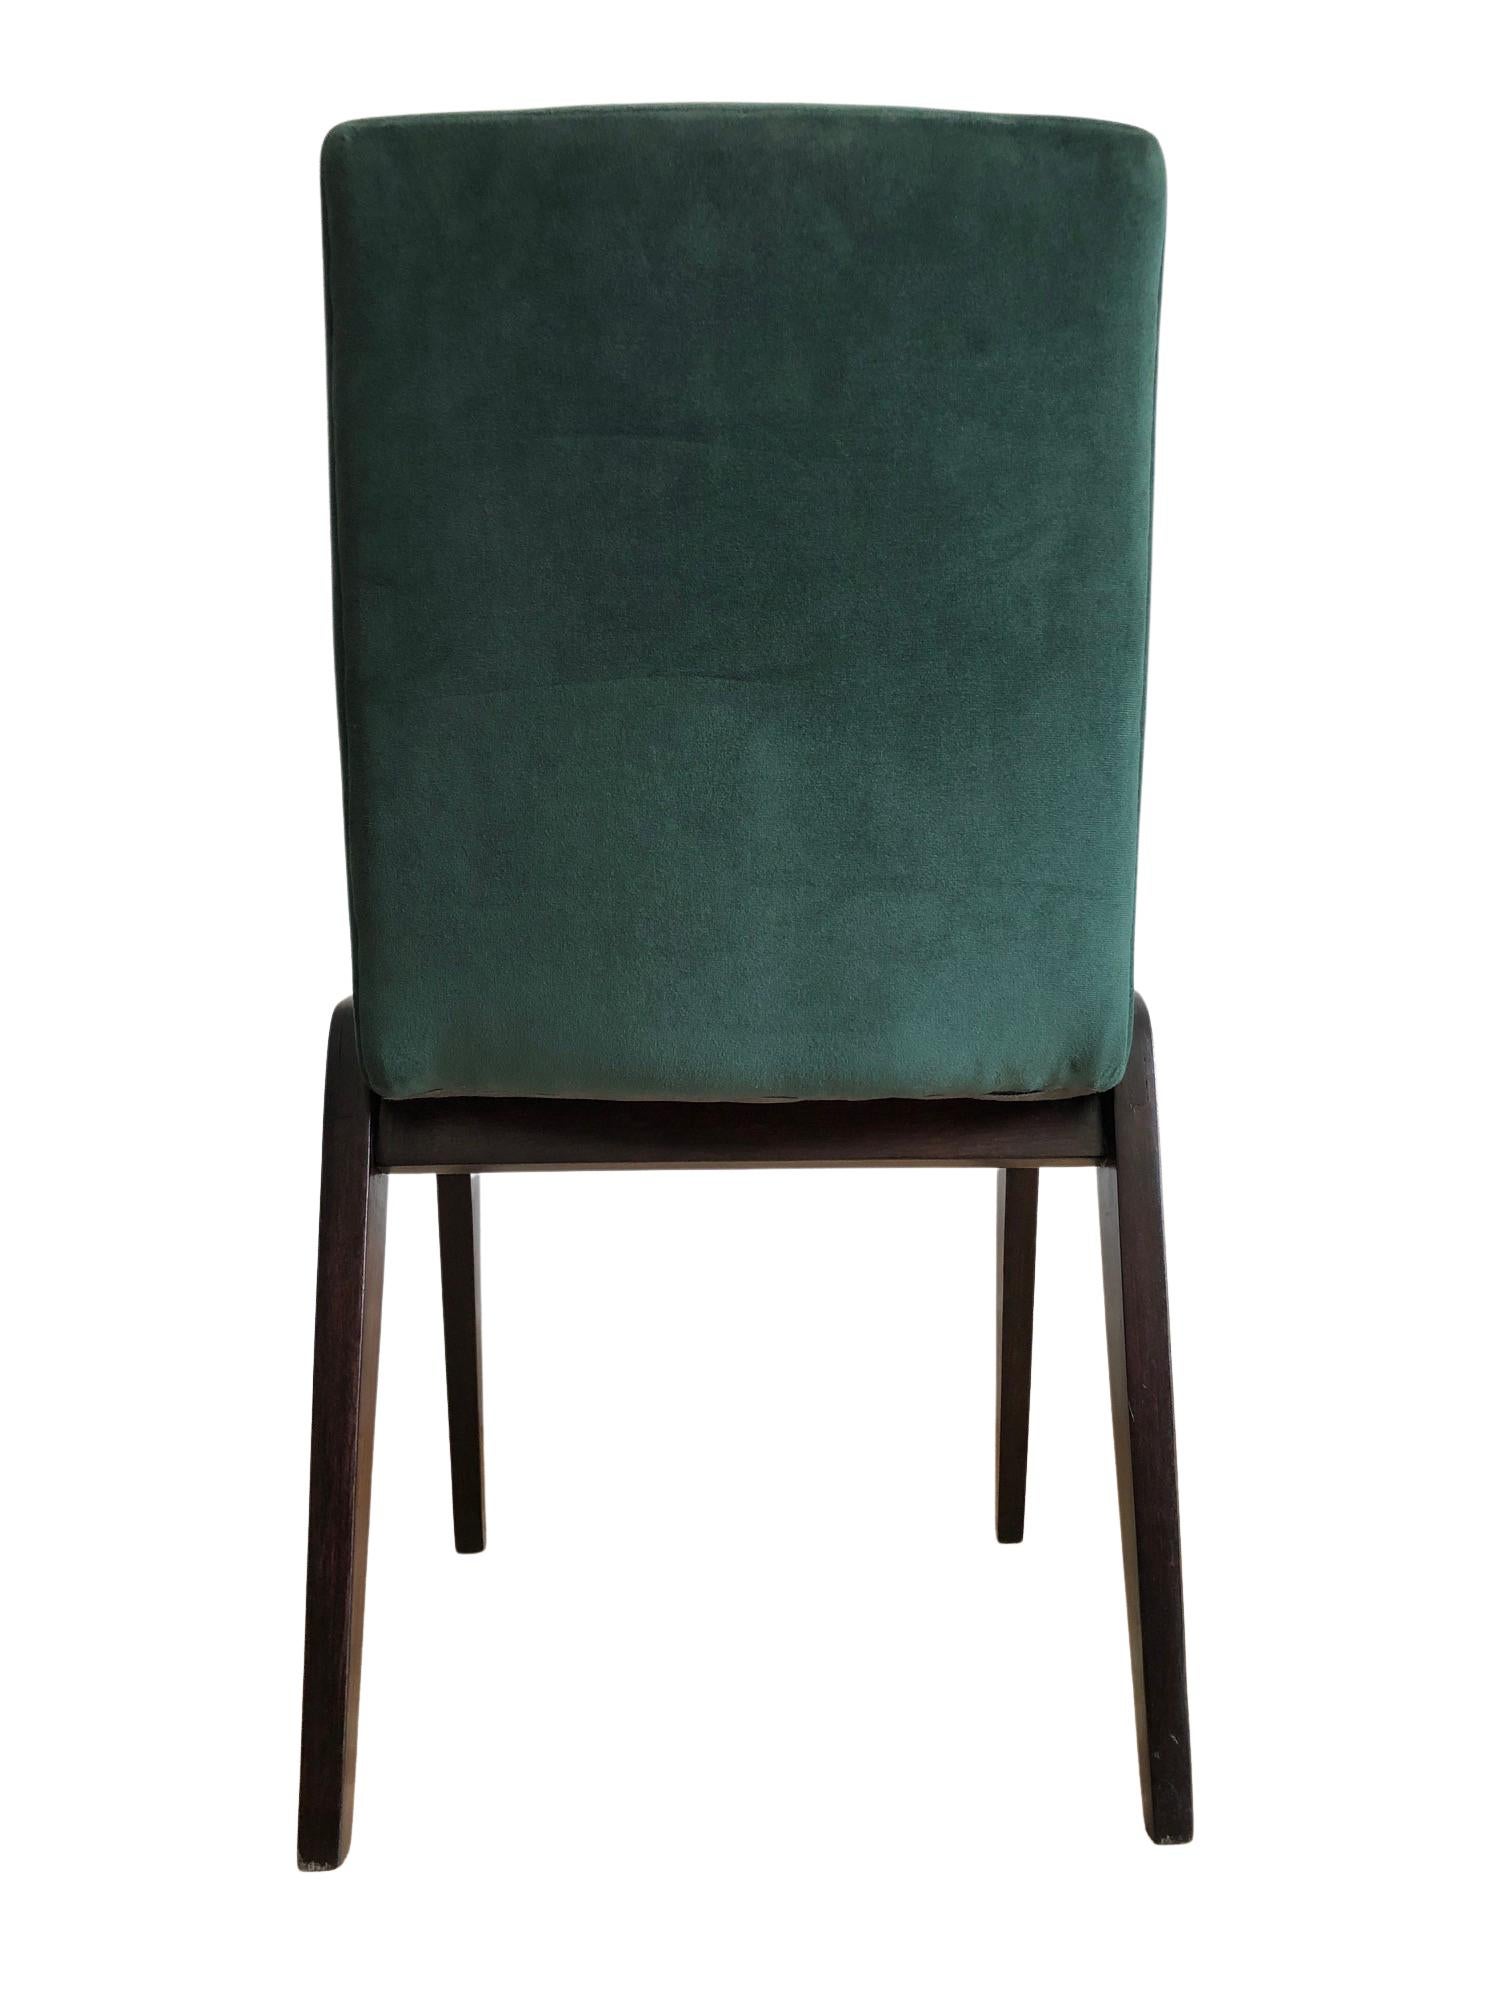 20th Century Mid-Century Chairs by Chierowski, in Green Velvet, 1960s, Set of 4 For Sale